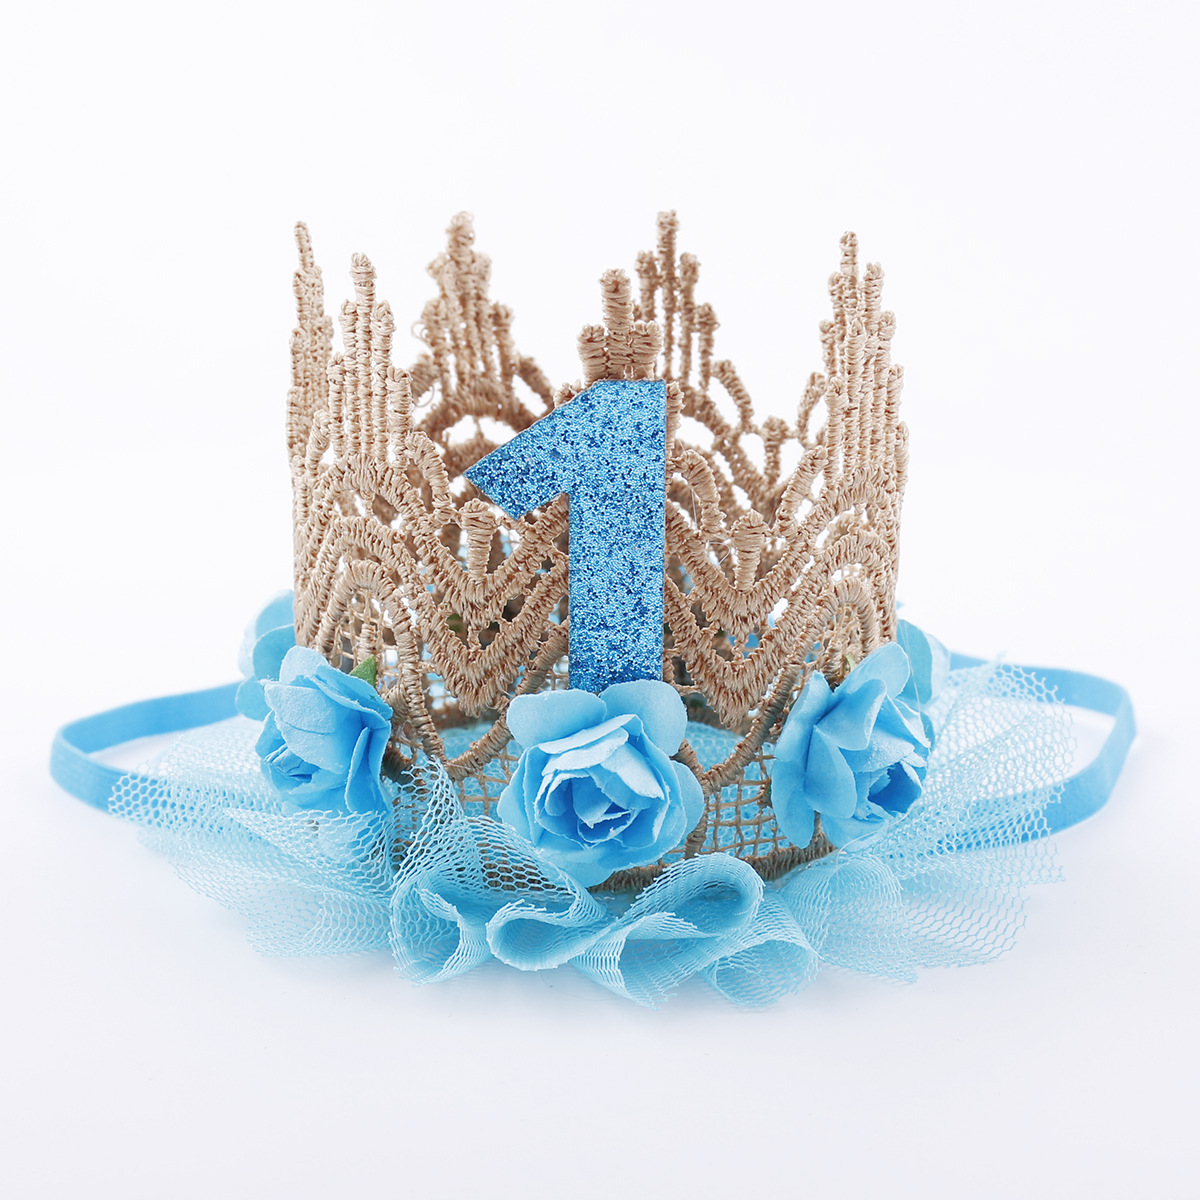 Kids Birthday Party Hat For 1 Year Old Newborn Birthday Cute Cap Lace Flowers Crown Creative Girl Party Hair Accessories